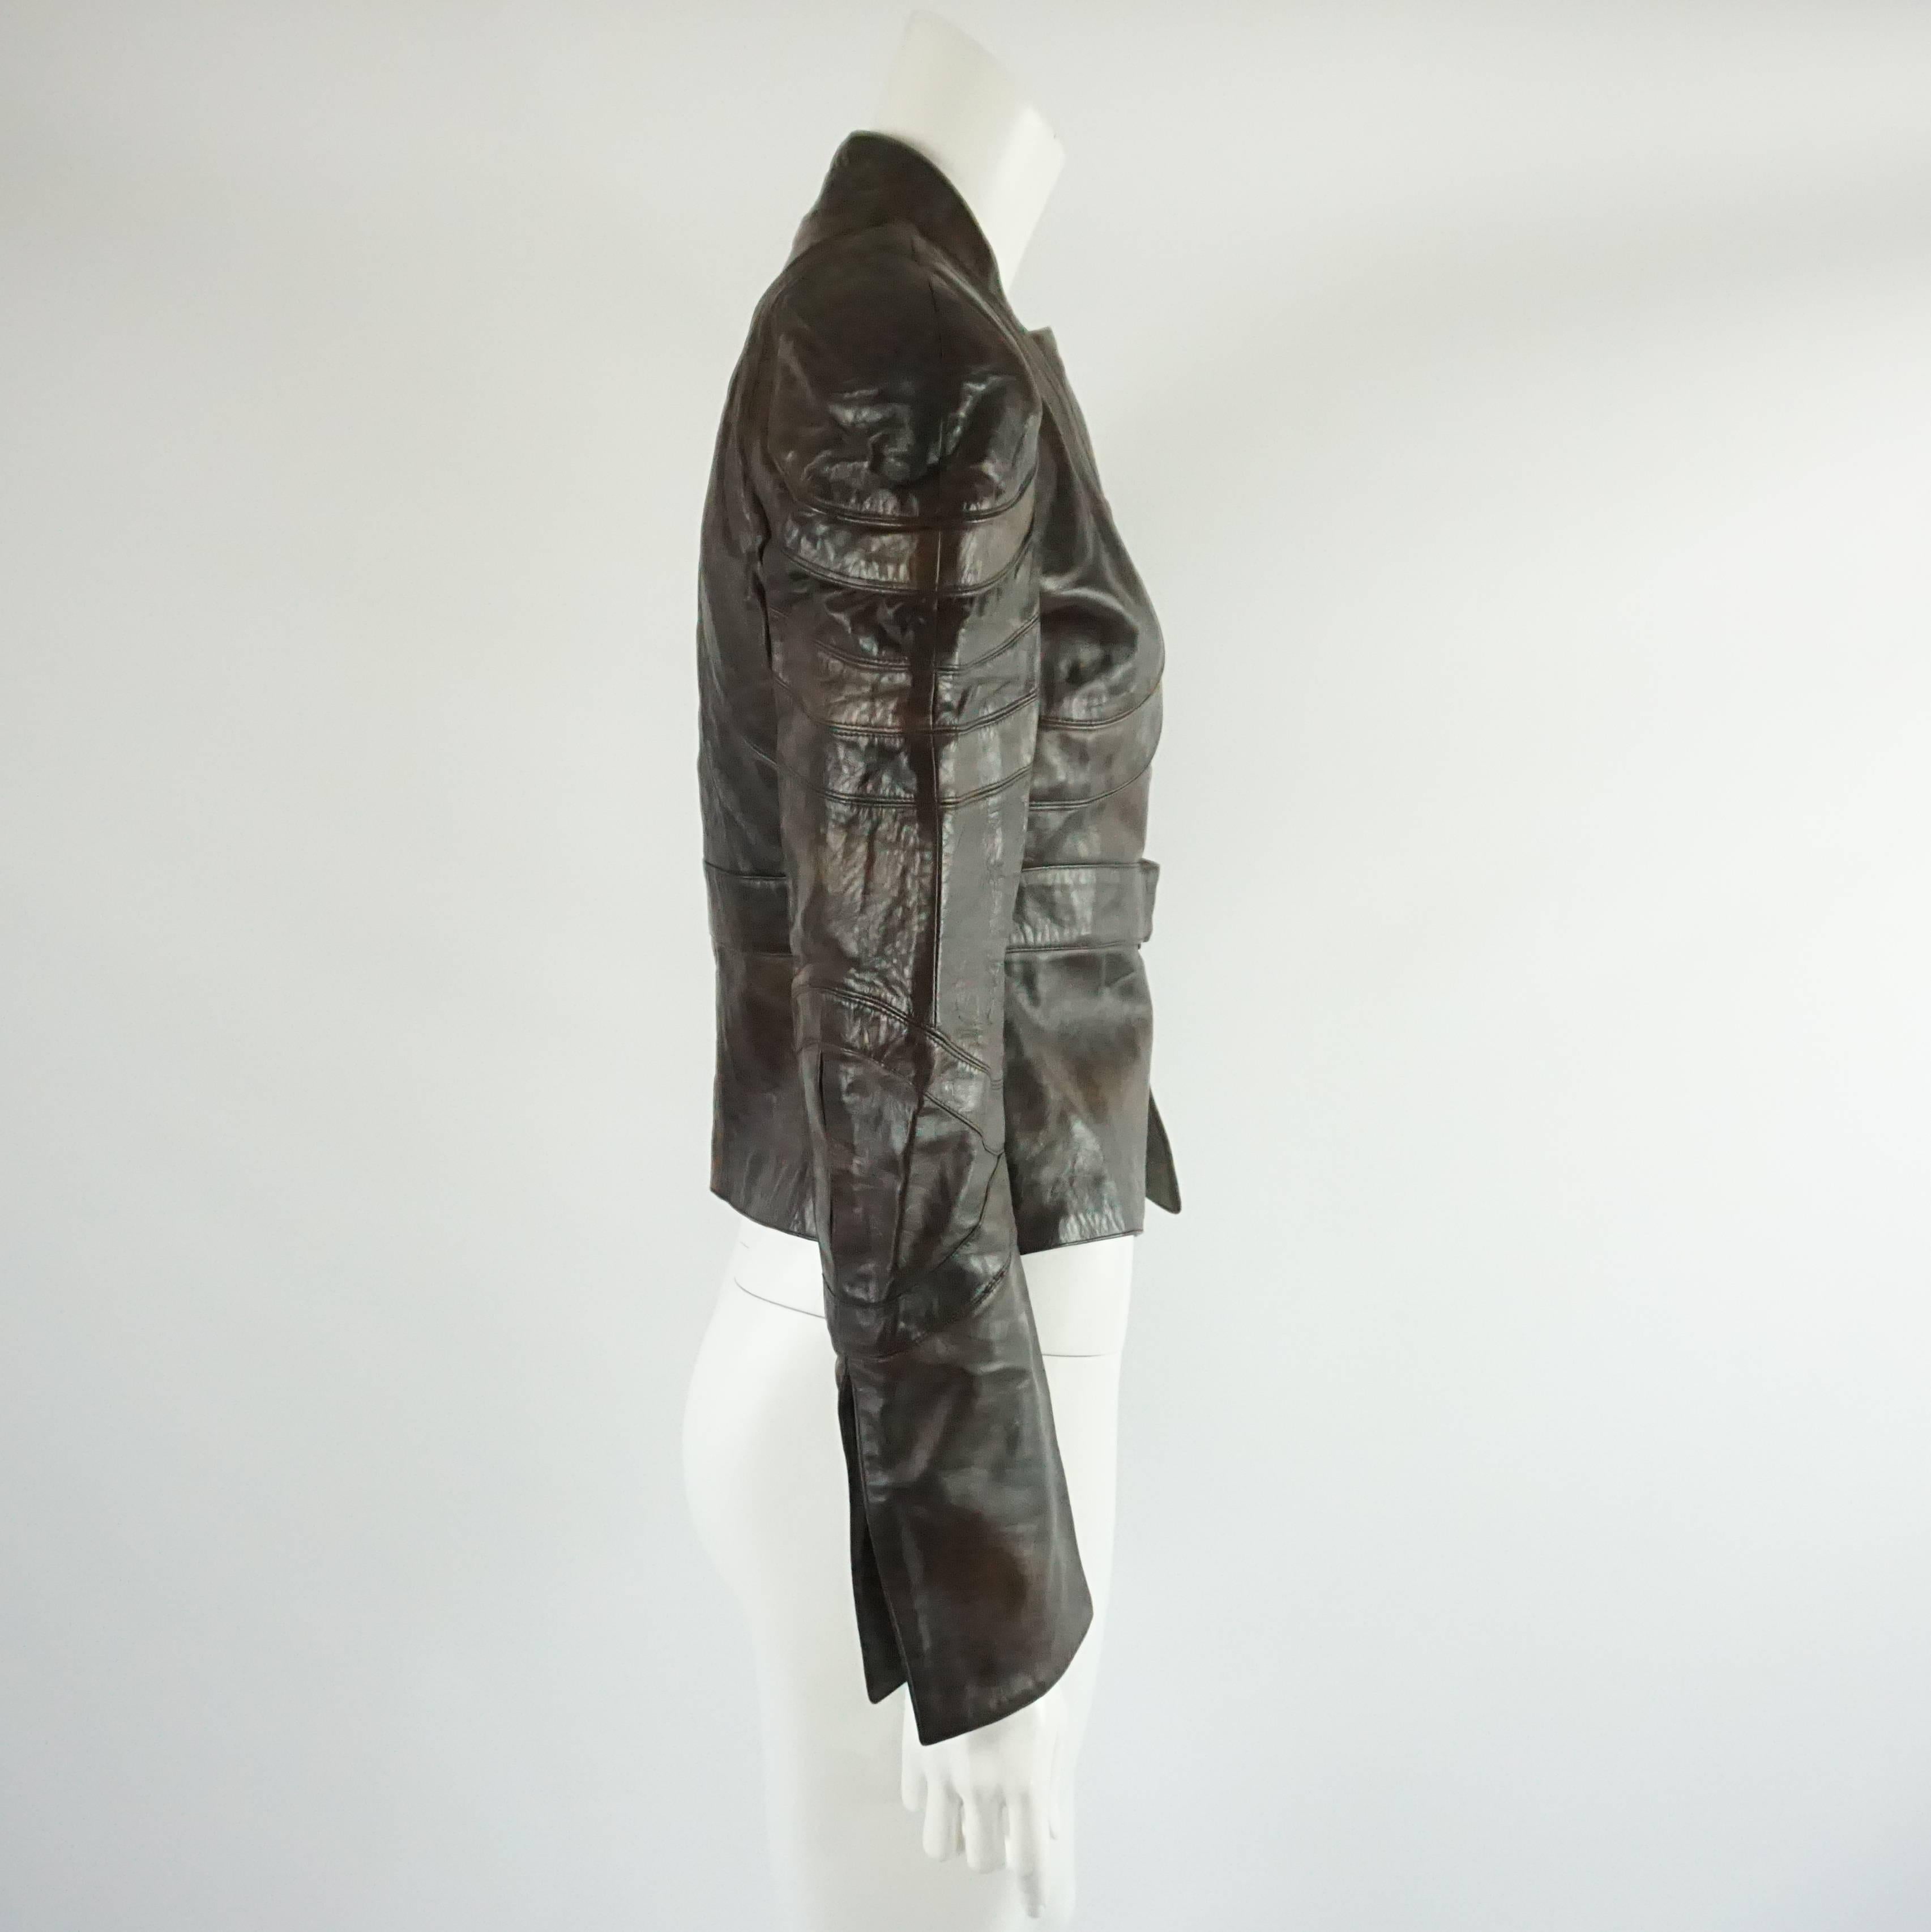 This fabulous Valentino leather jacket is tapered at the waist and has a button on the waist band. It is both chocolate brown and a lighter brown. The cuffs have a slit in them. This jacket is in very good condition with some discoloration and